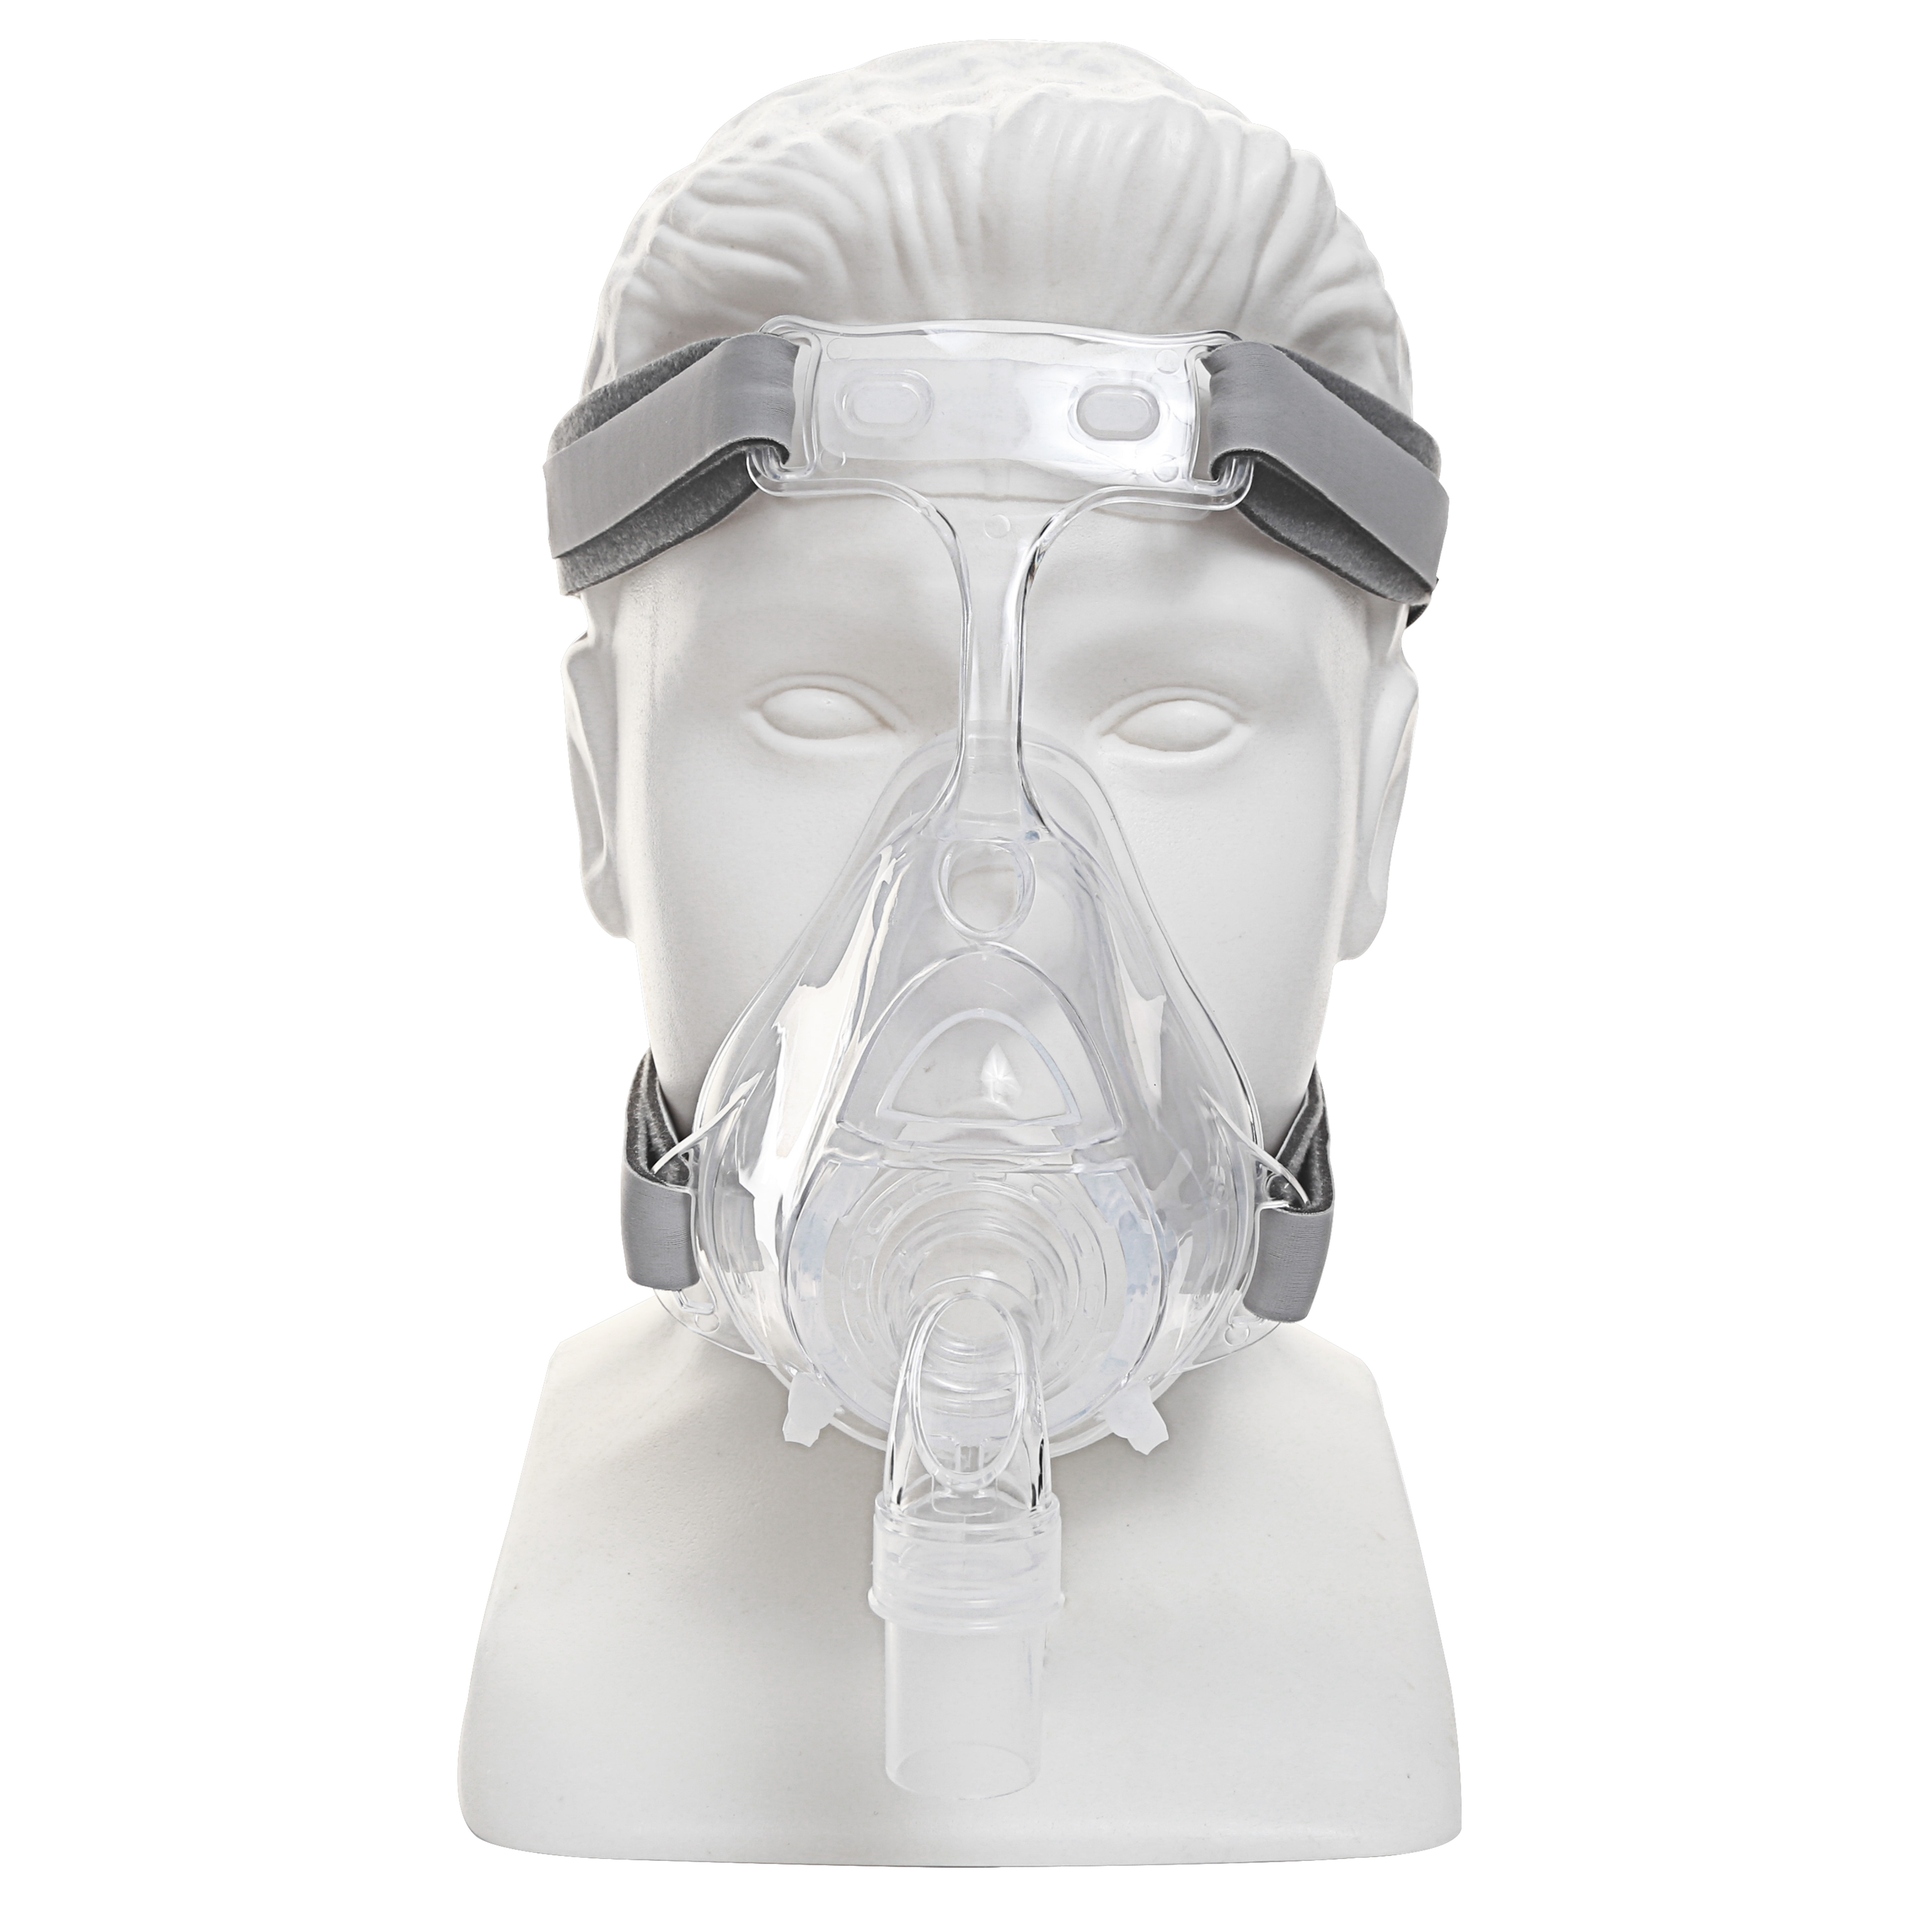 FA-05 CPAP Full Face Mask Medical Use and Home Use 